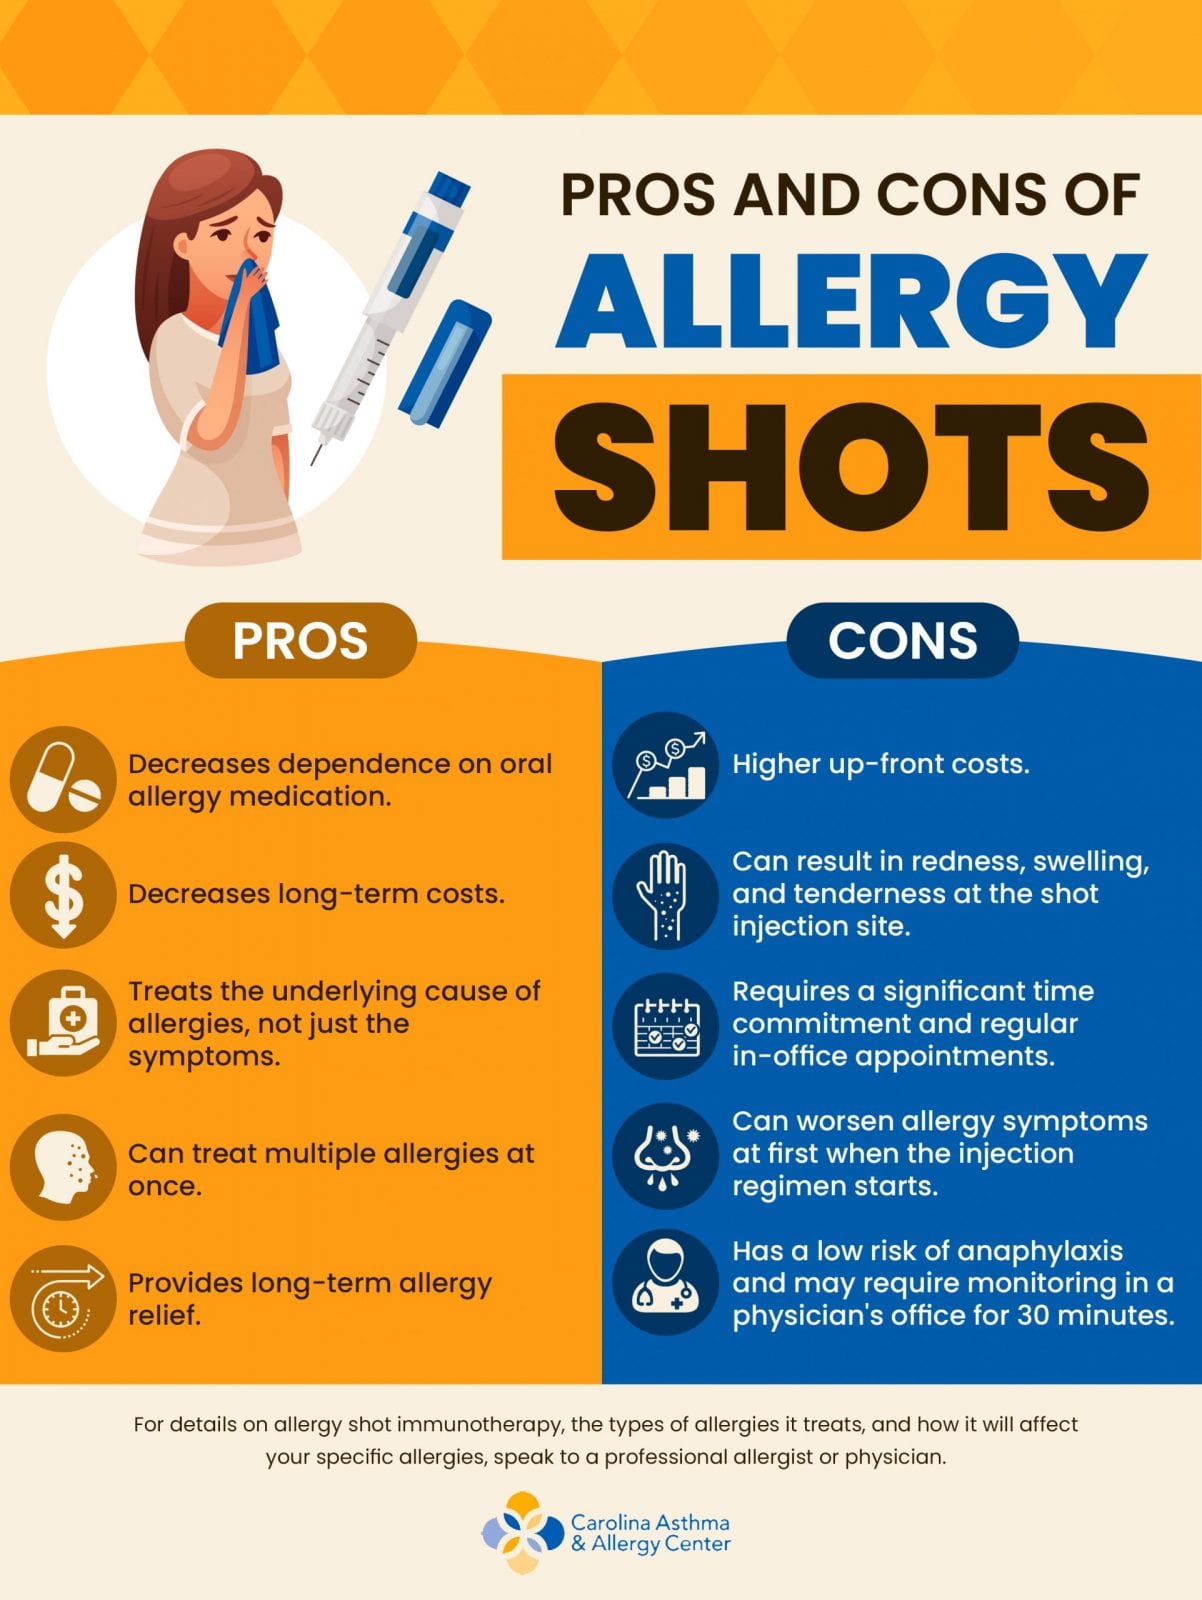 Advantages and Disadvantages of Allergy Shots Carolina Asthma and